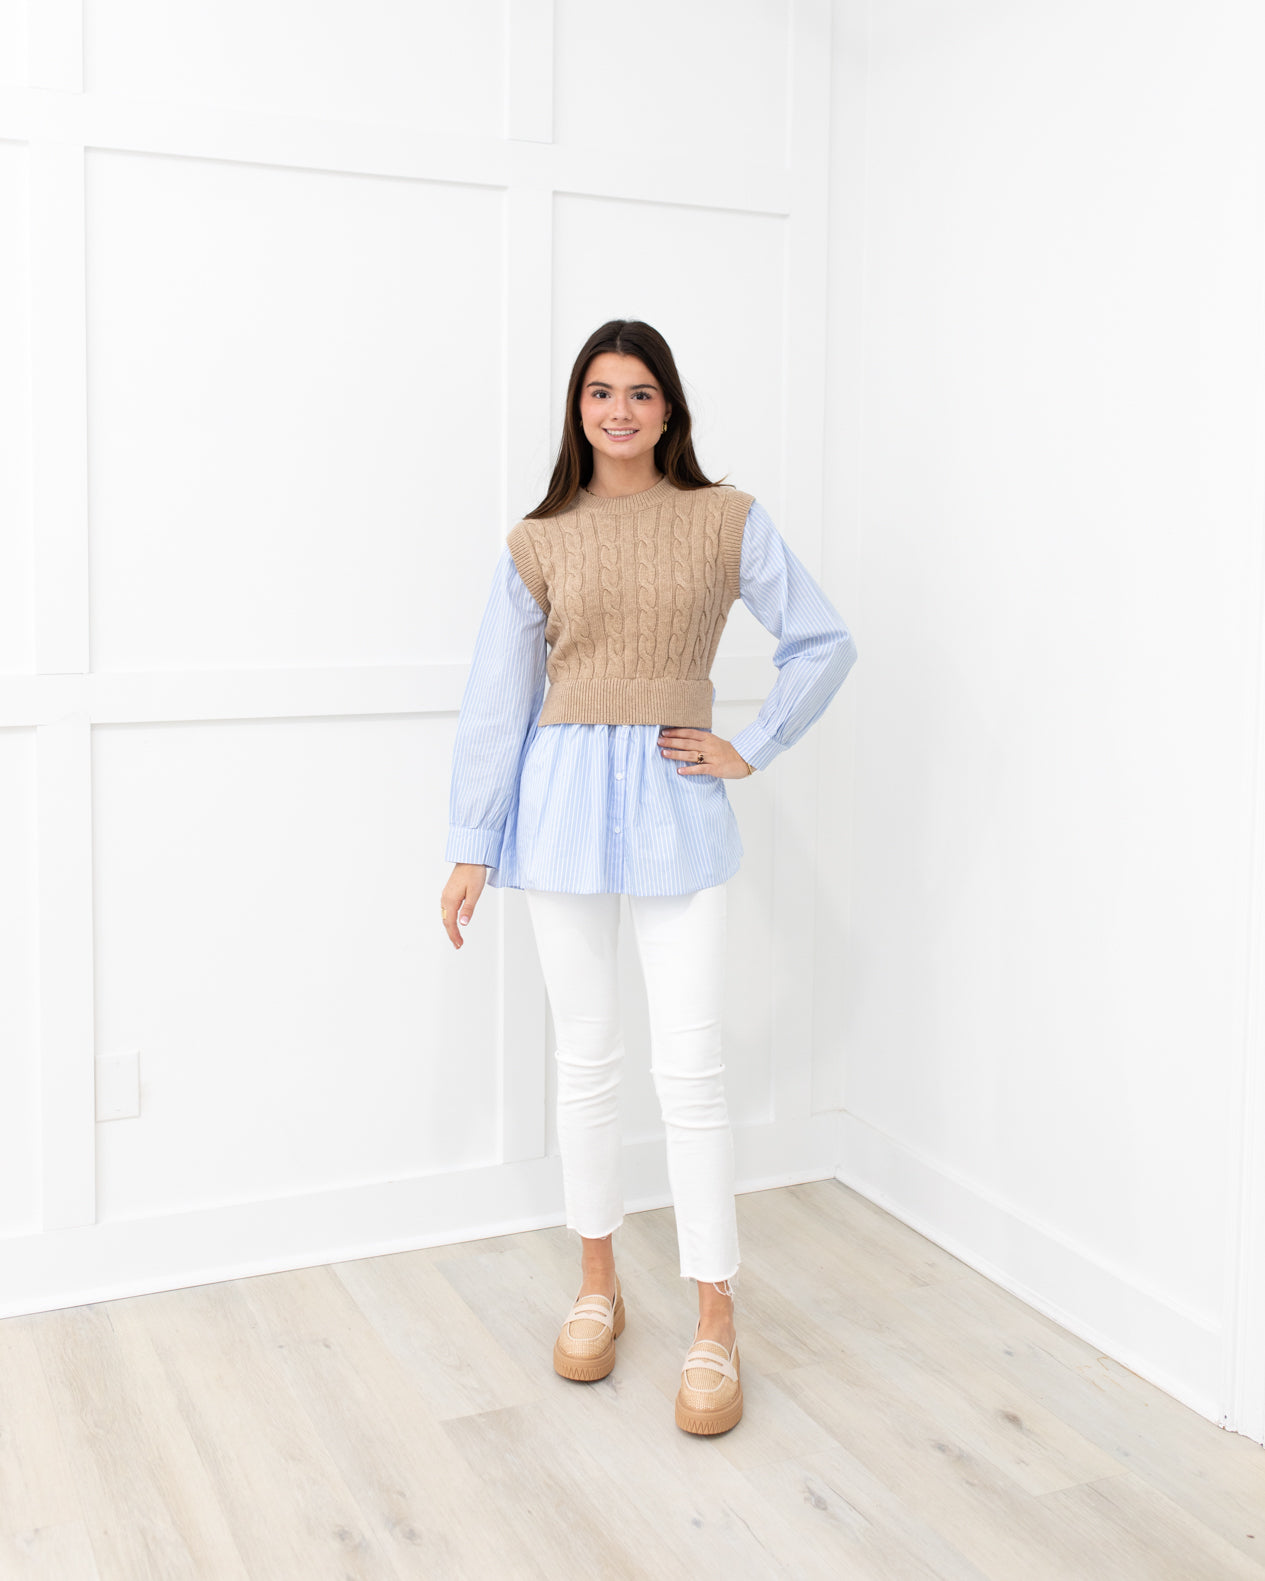 Beige Cable Knit Sweater with Blue Striped Shirt